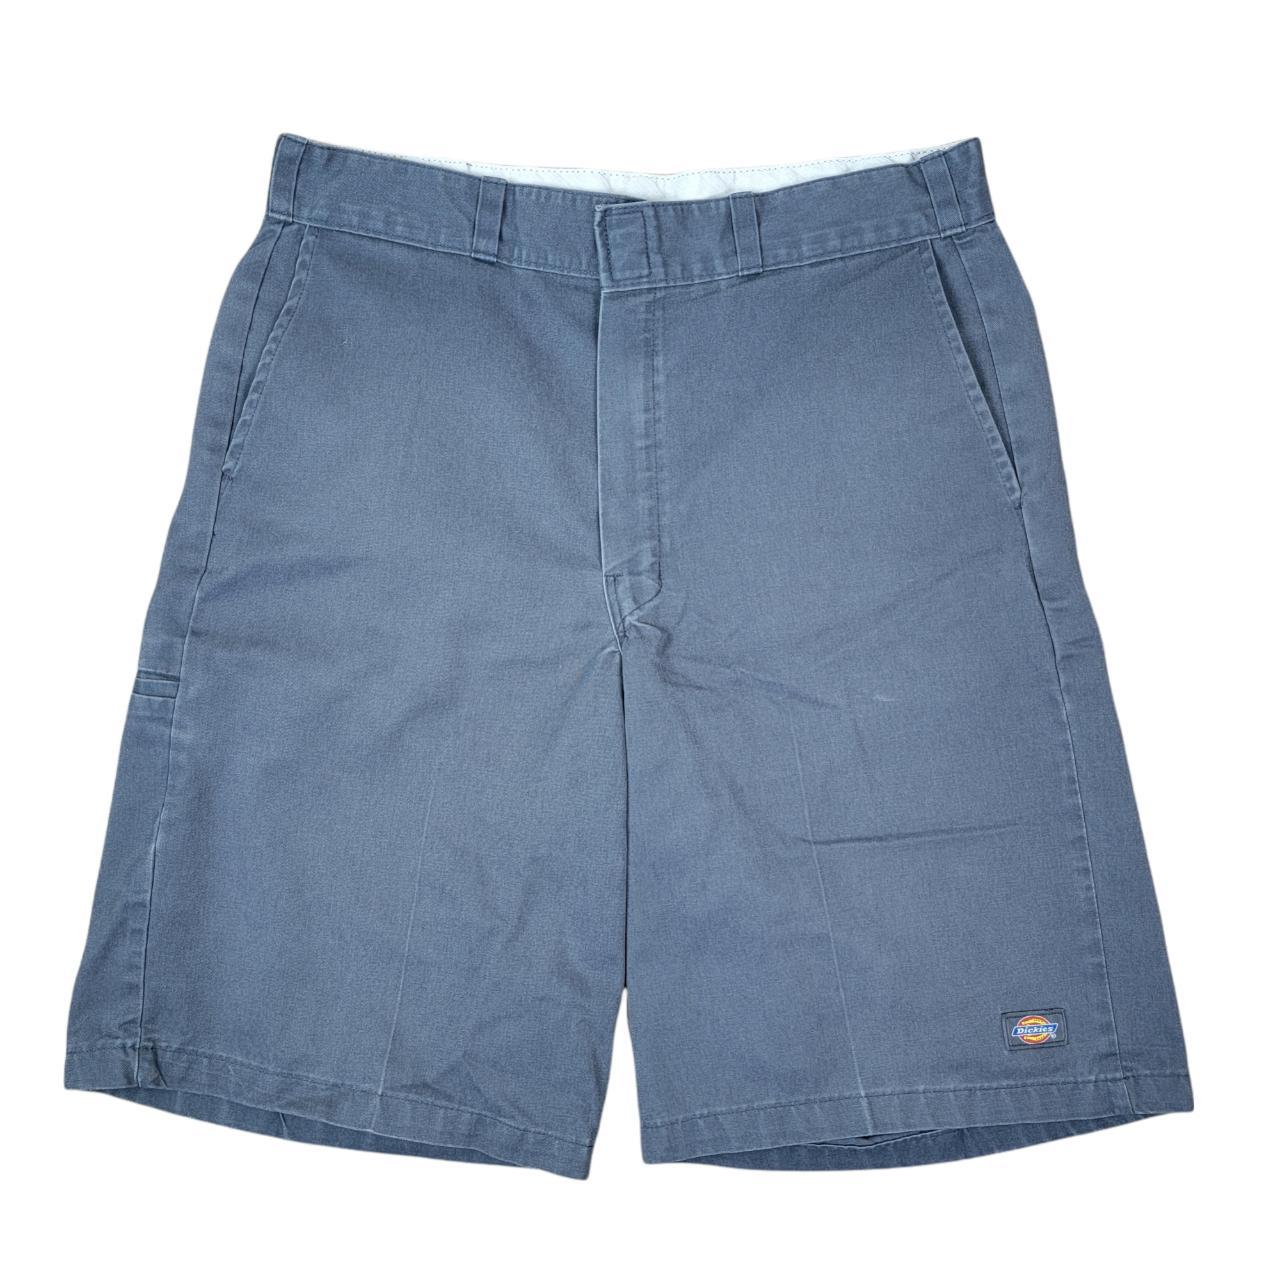 Product Image 1 - Dickies Gray Work Shorts 34

Brand: